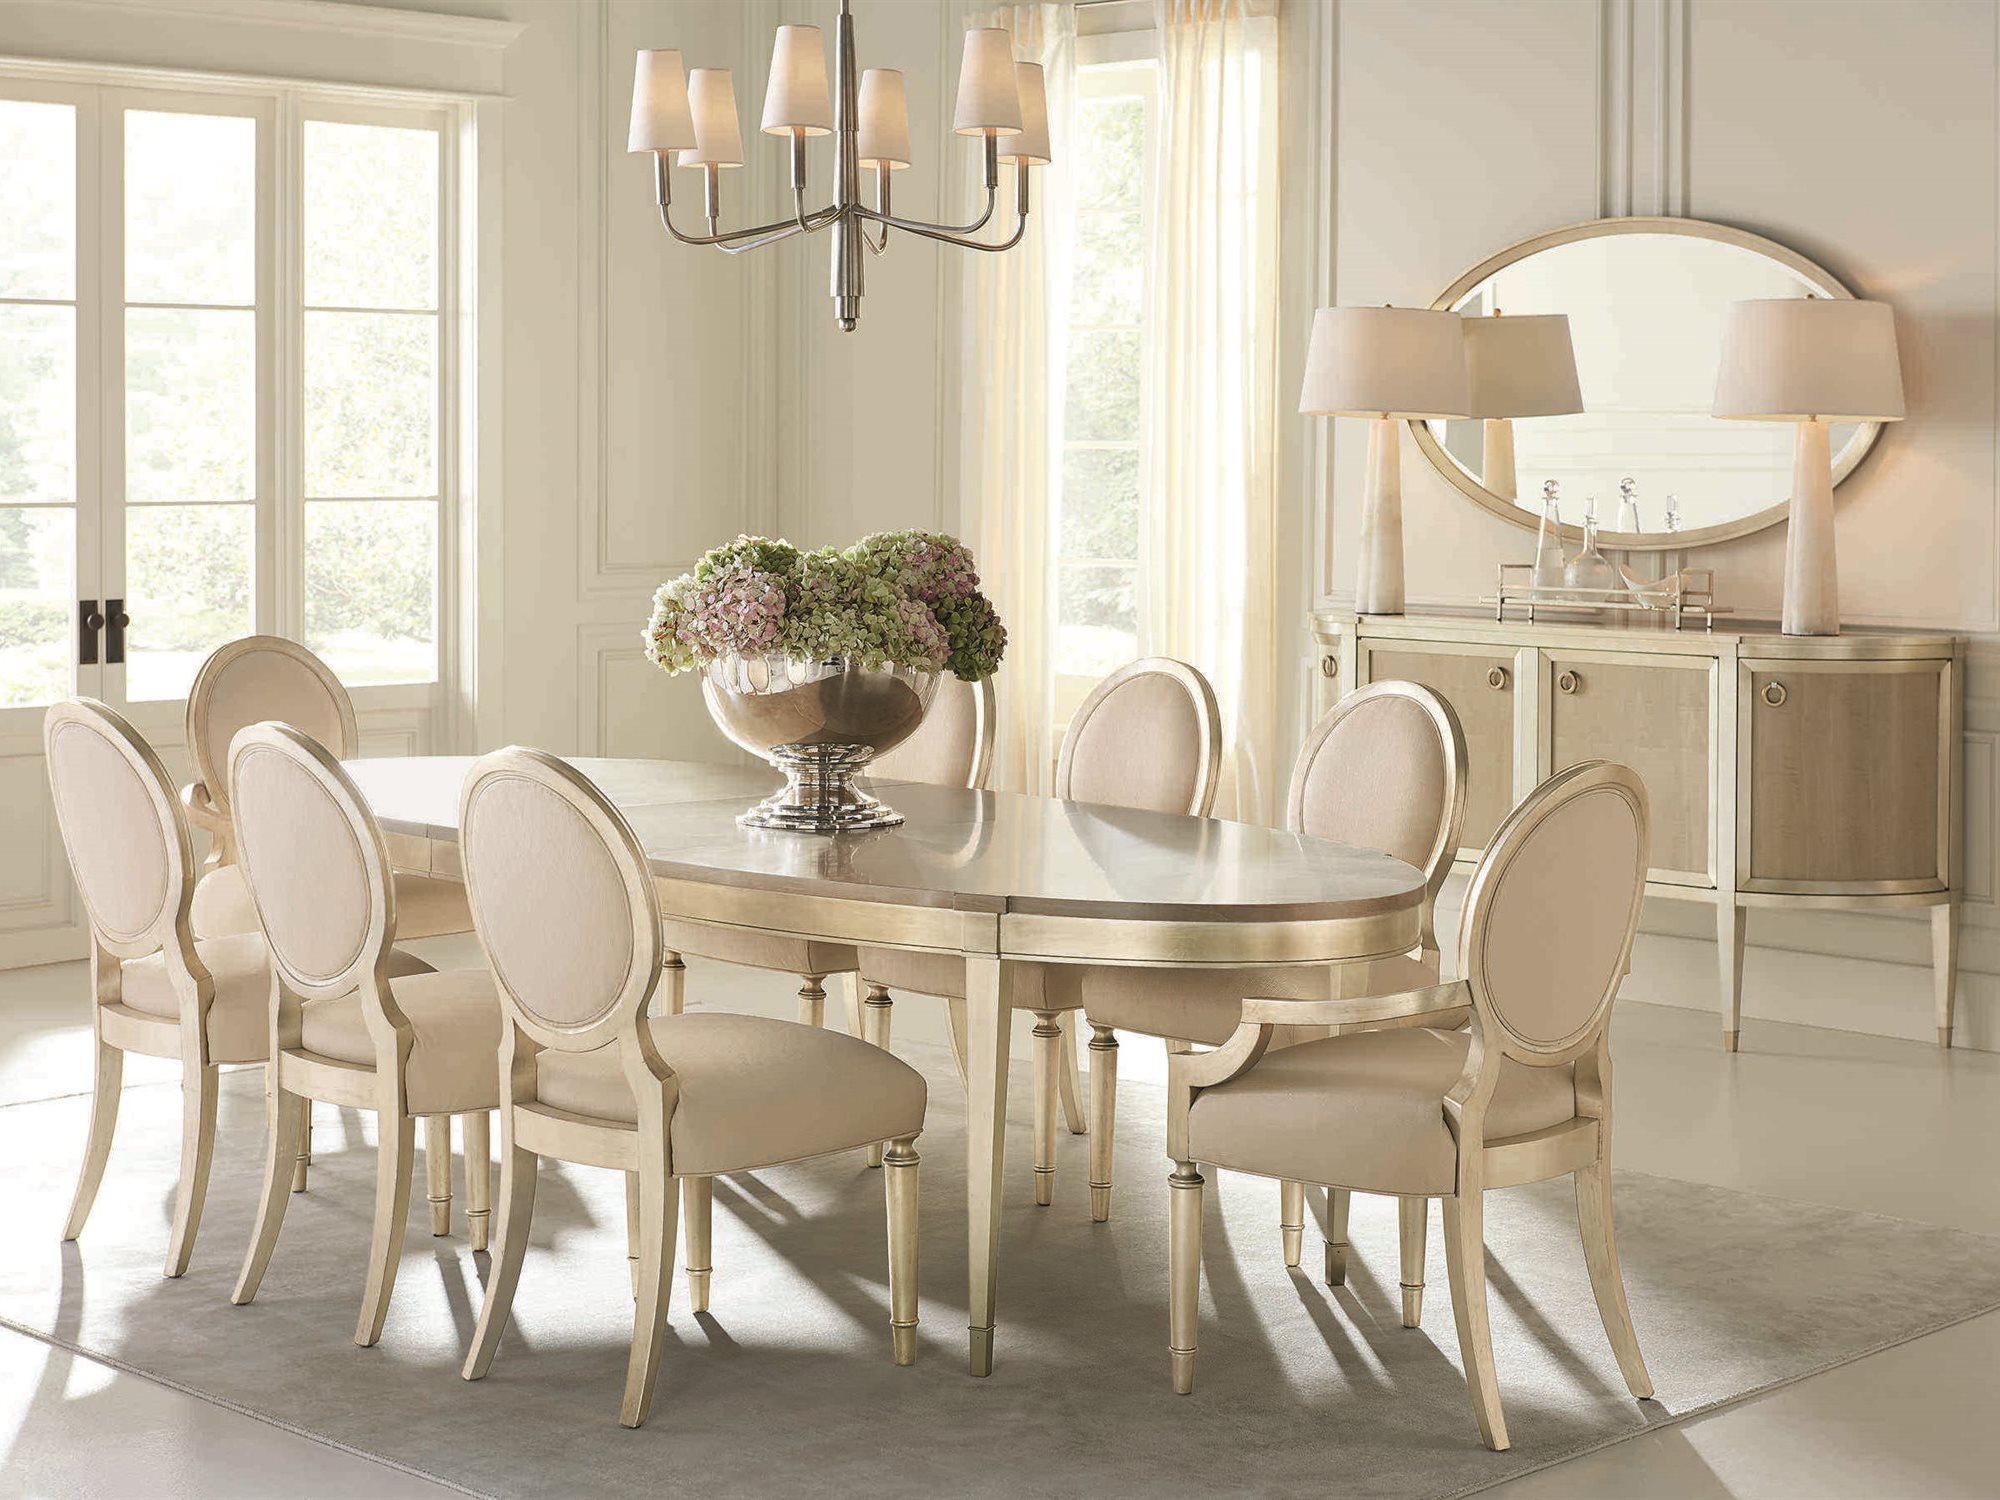 Caracole Classic Dining Room Set, Classic Dining Room Table And Chairs